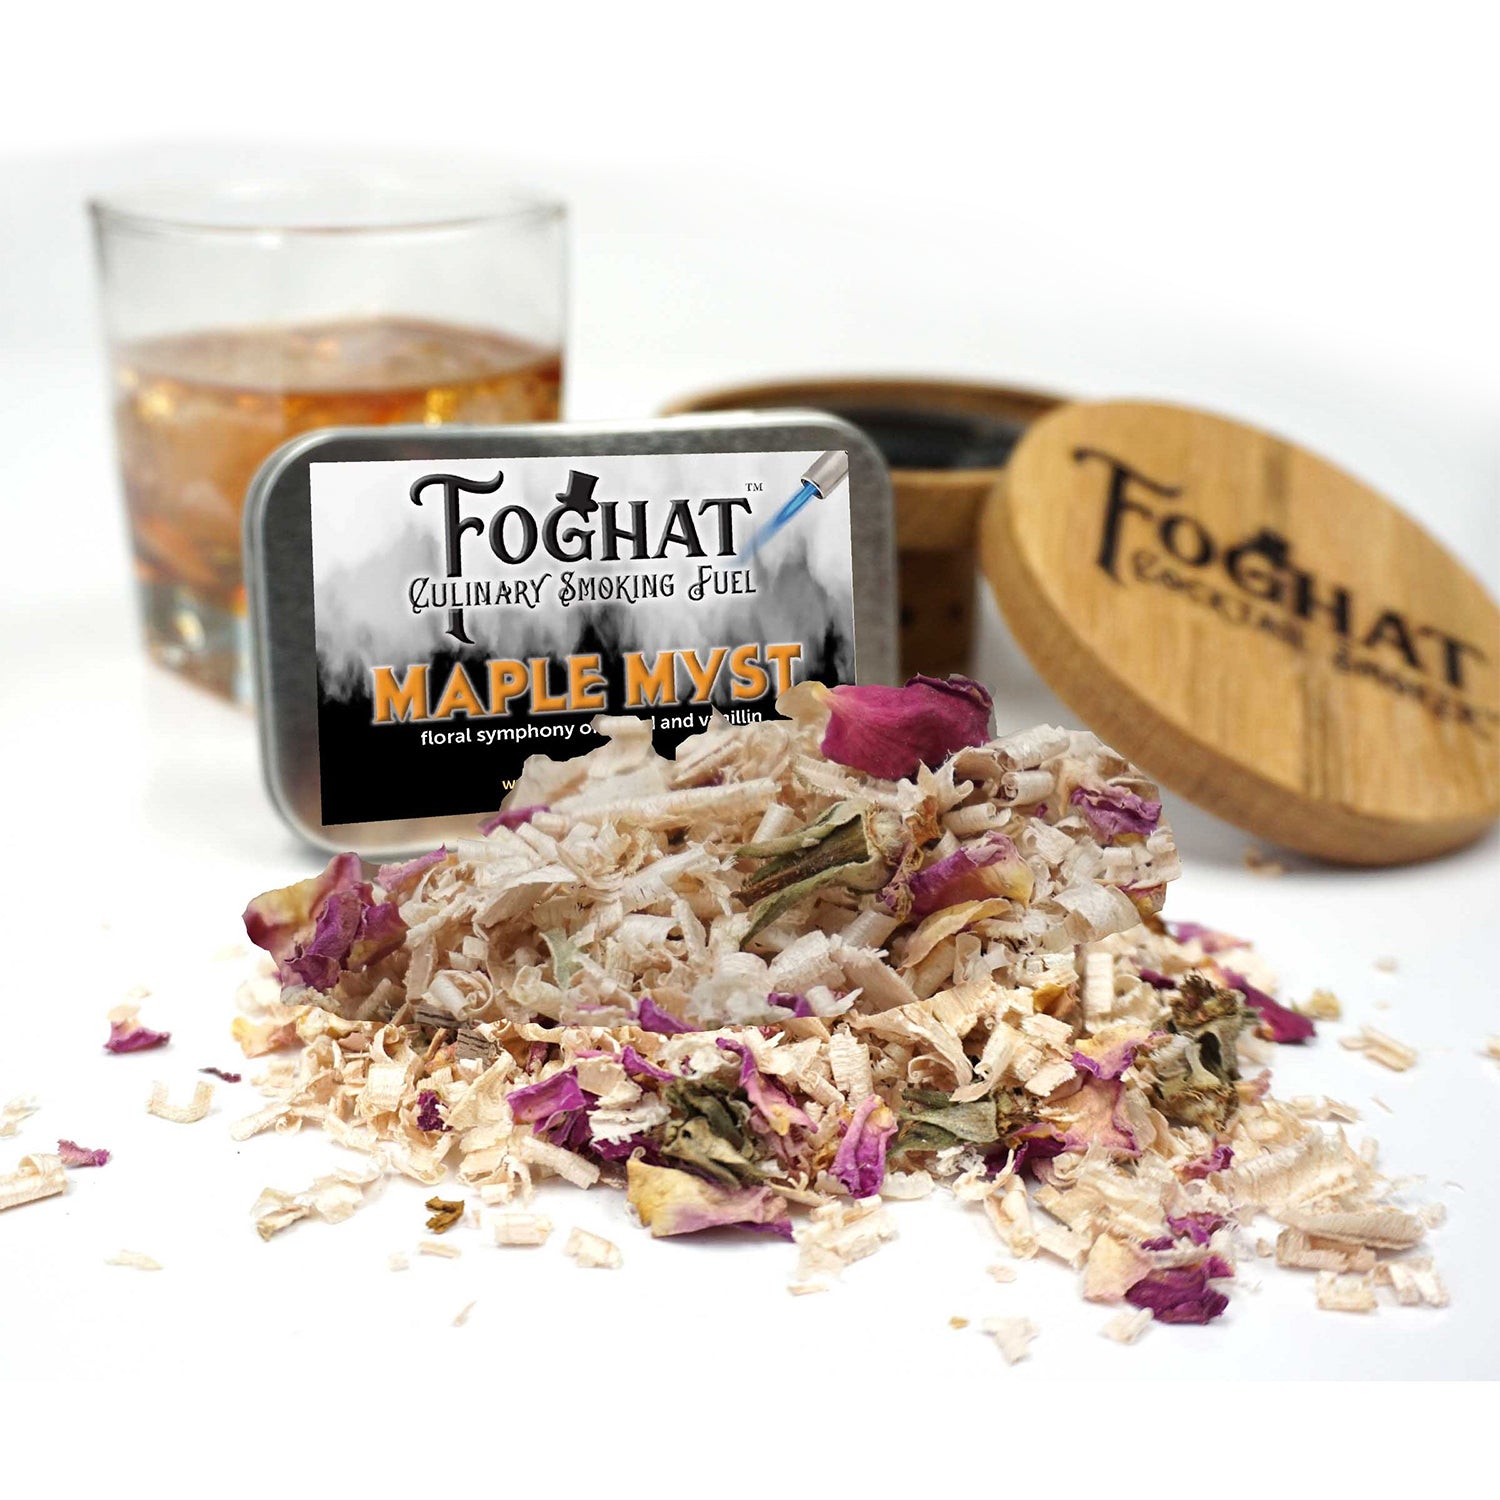 Foghat Culinary Smoking Fuel Maple Myst Floral & Vanilla All-Natural 4 Ounce